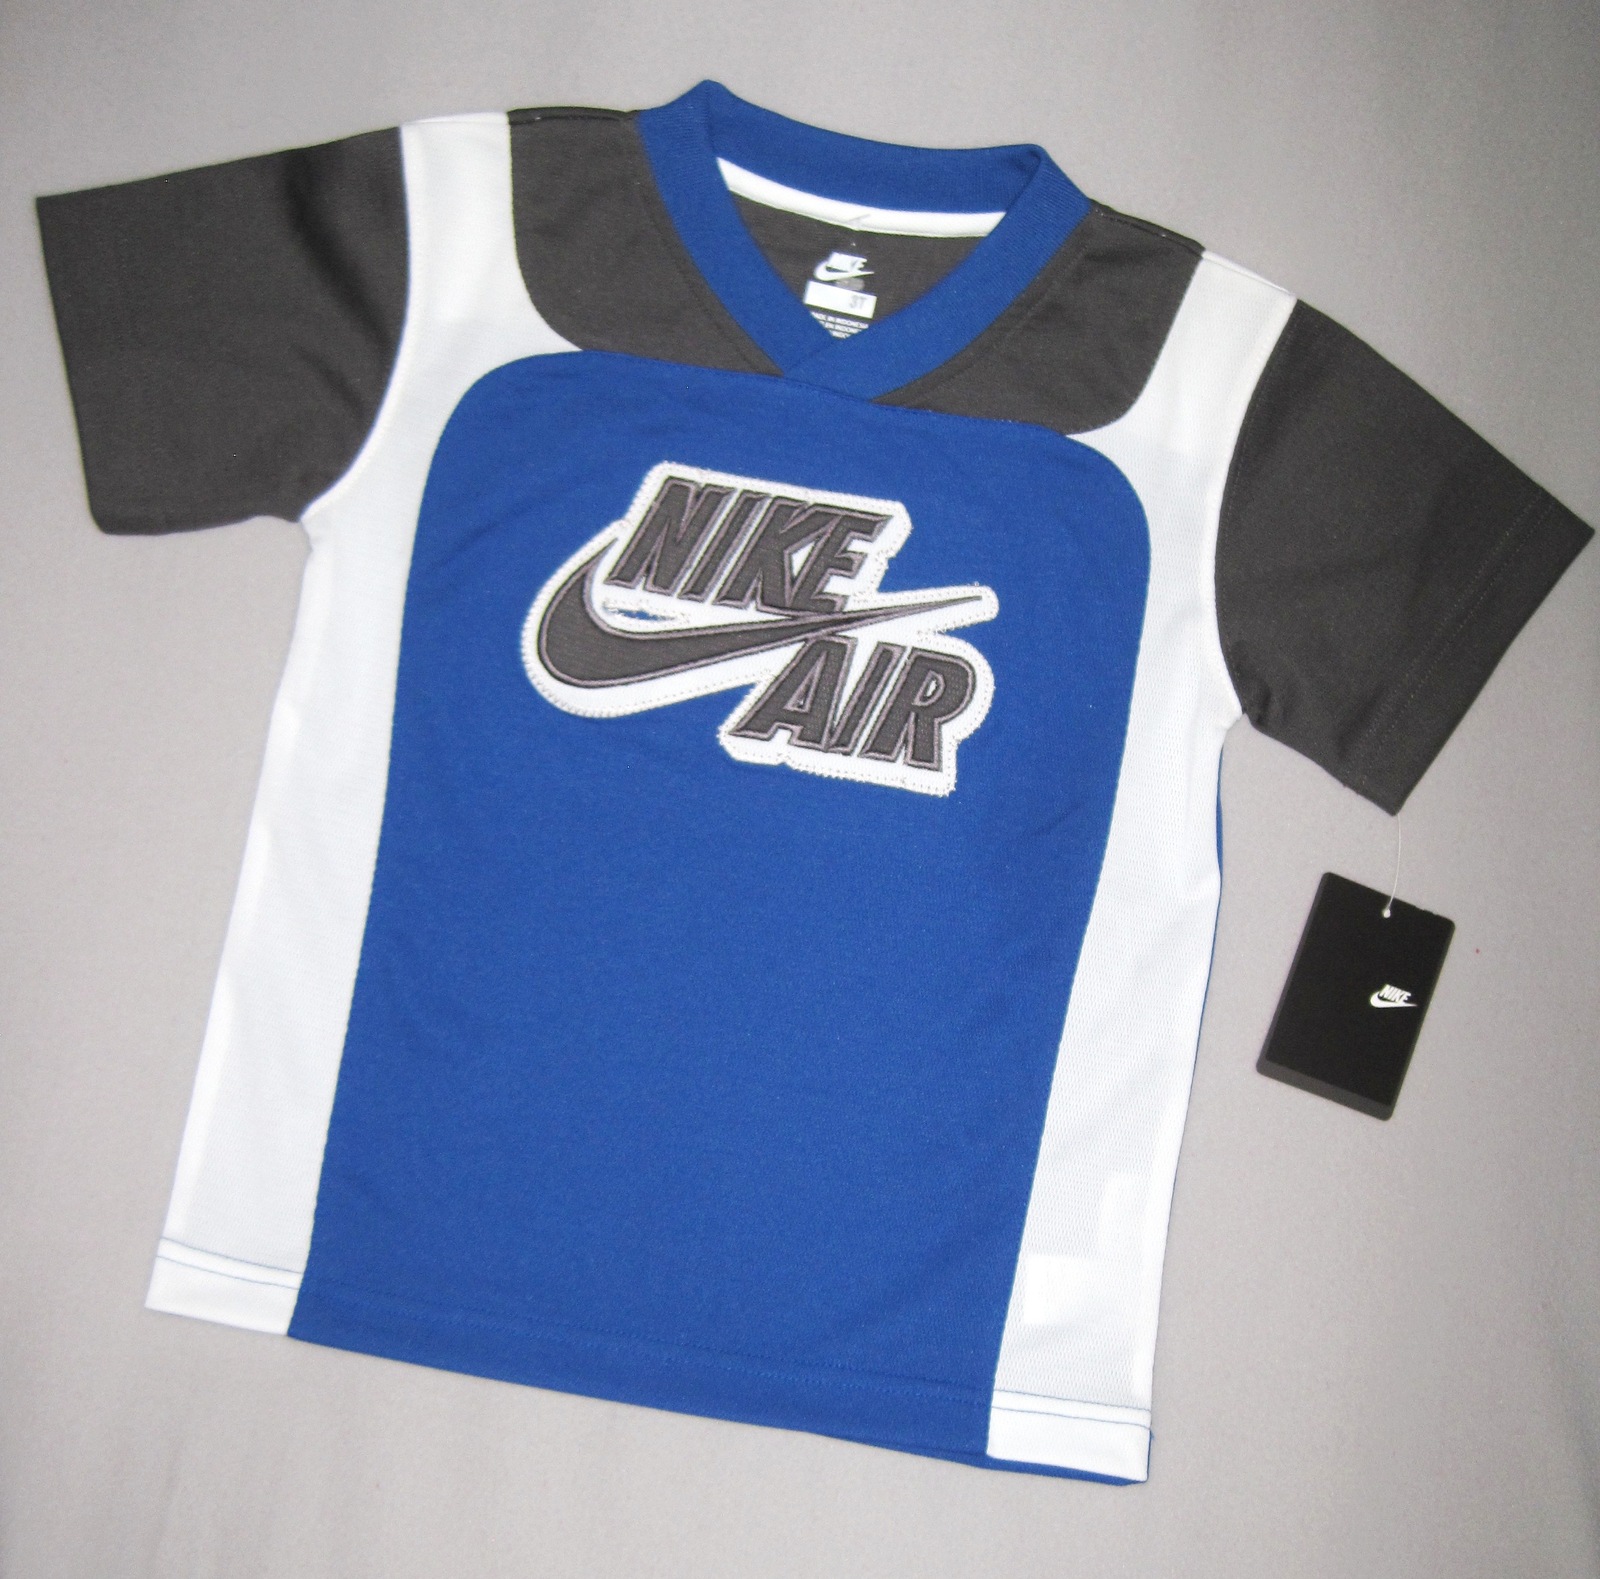 BOYS 4T - Nike - Nike Air Blue, Charcoal & White Short-Sleeved SPORTS JERSEY - $25.00